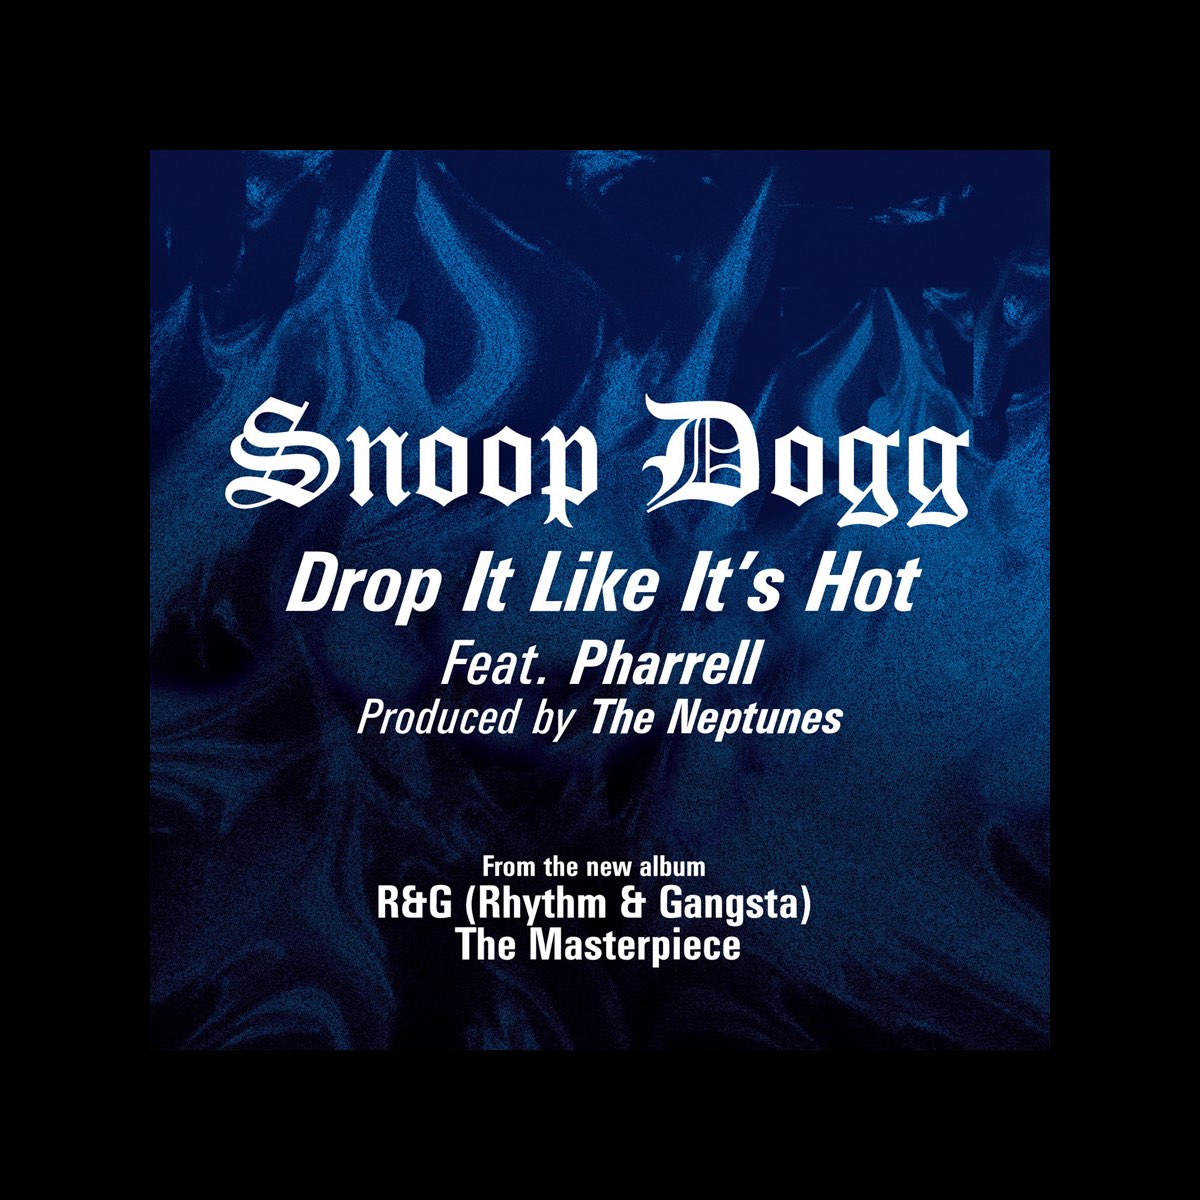 Snoop dogg drop it like. Snoop Dogg Drop it like it's hot. Snoop Dogg feat. Pharrell - Drop it like it's hot. Snoop Dogg ft. Pharrell Williams - Drop it like it's hot (Radio Edit). Drop it like it's hot текст.